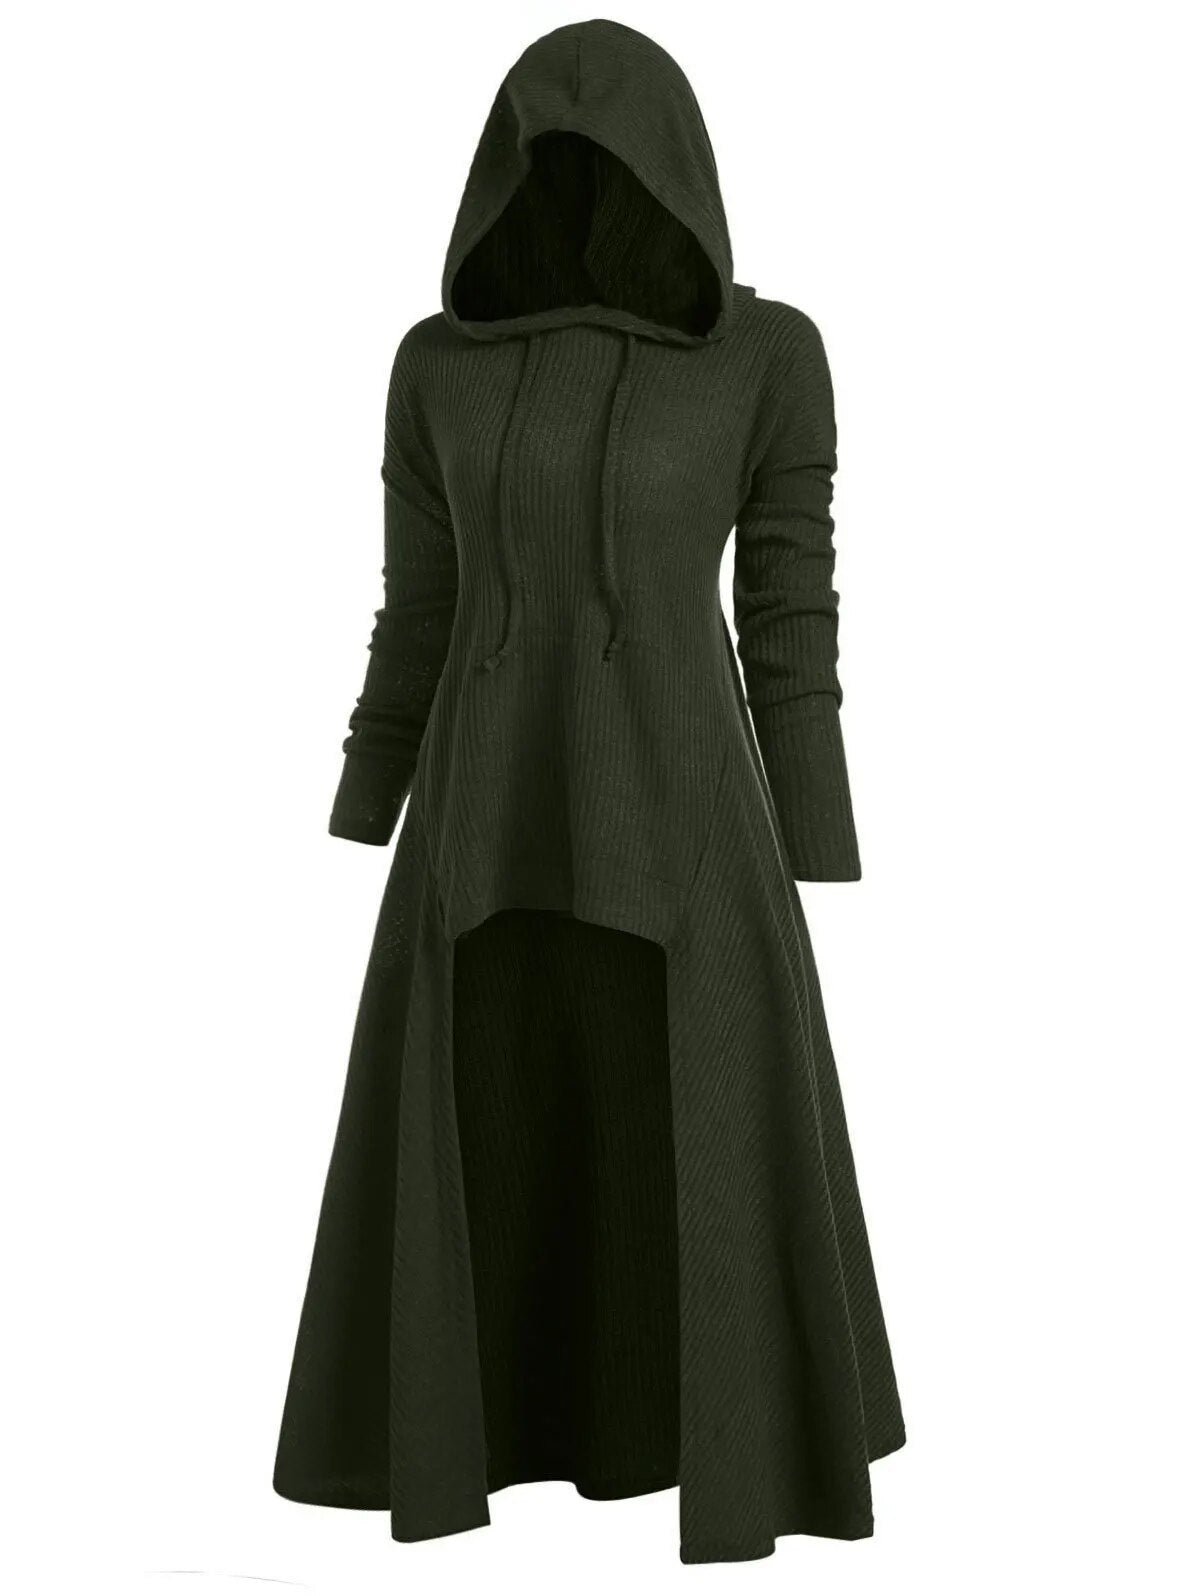 Cosplay Witch Tunic Hooded Robe Cloak Knight Gothic Women Halloween Holiday Evening Dress Up Party Fancy Dress Masquerade Ball